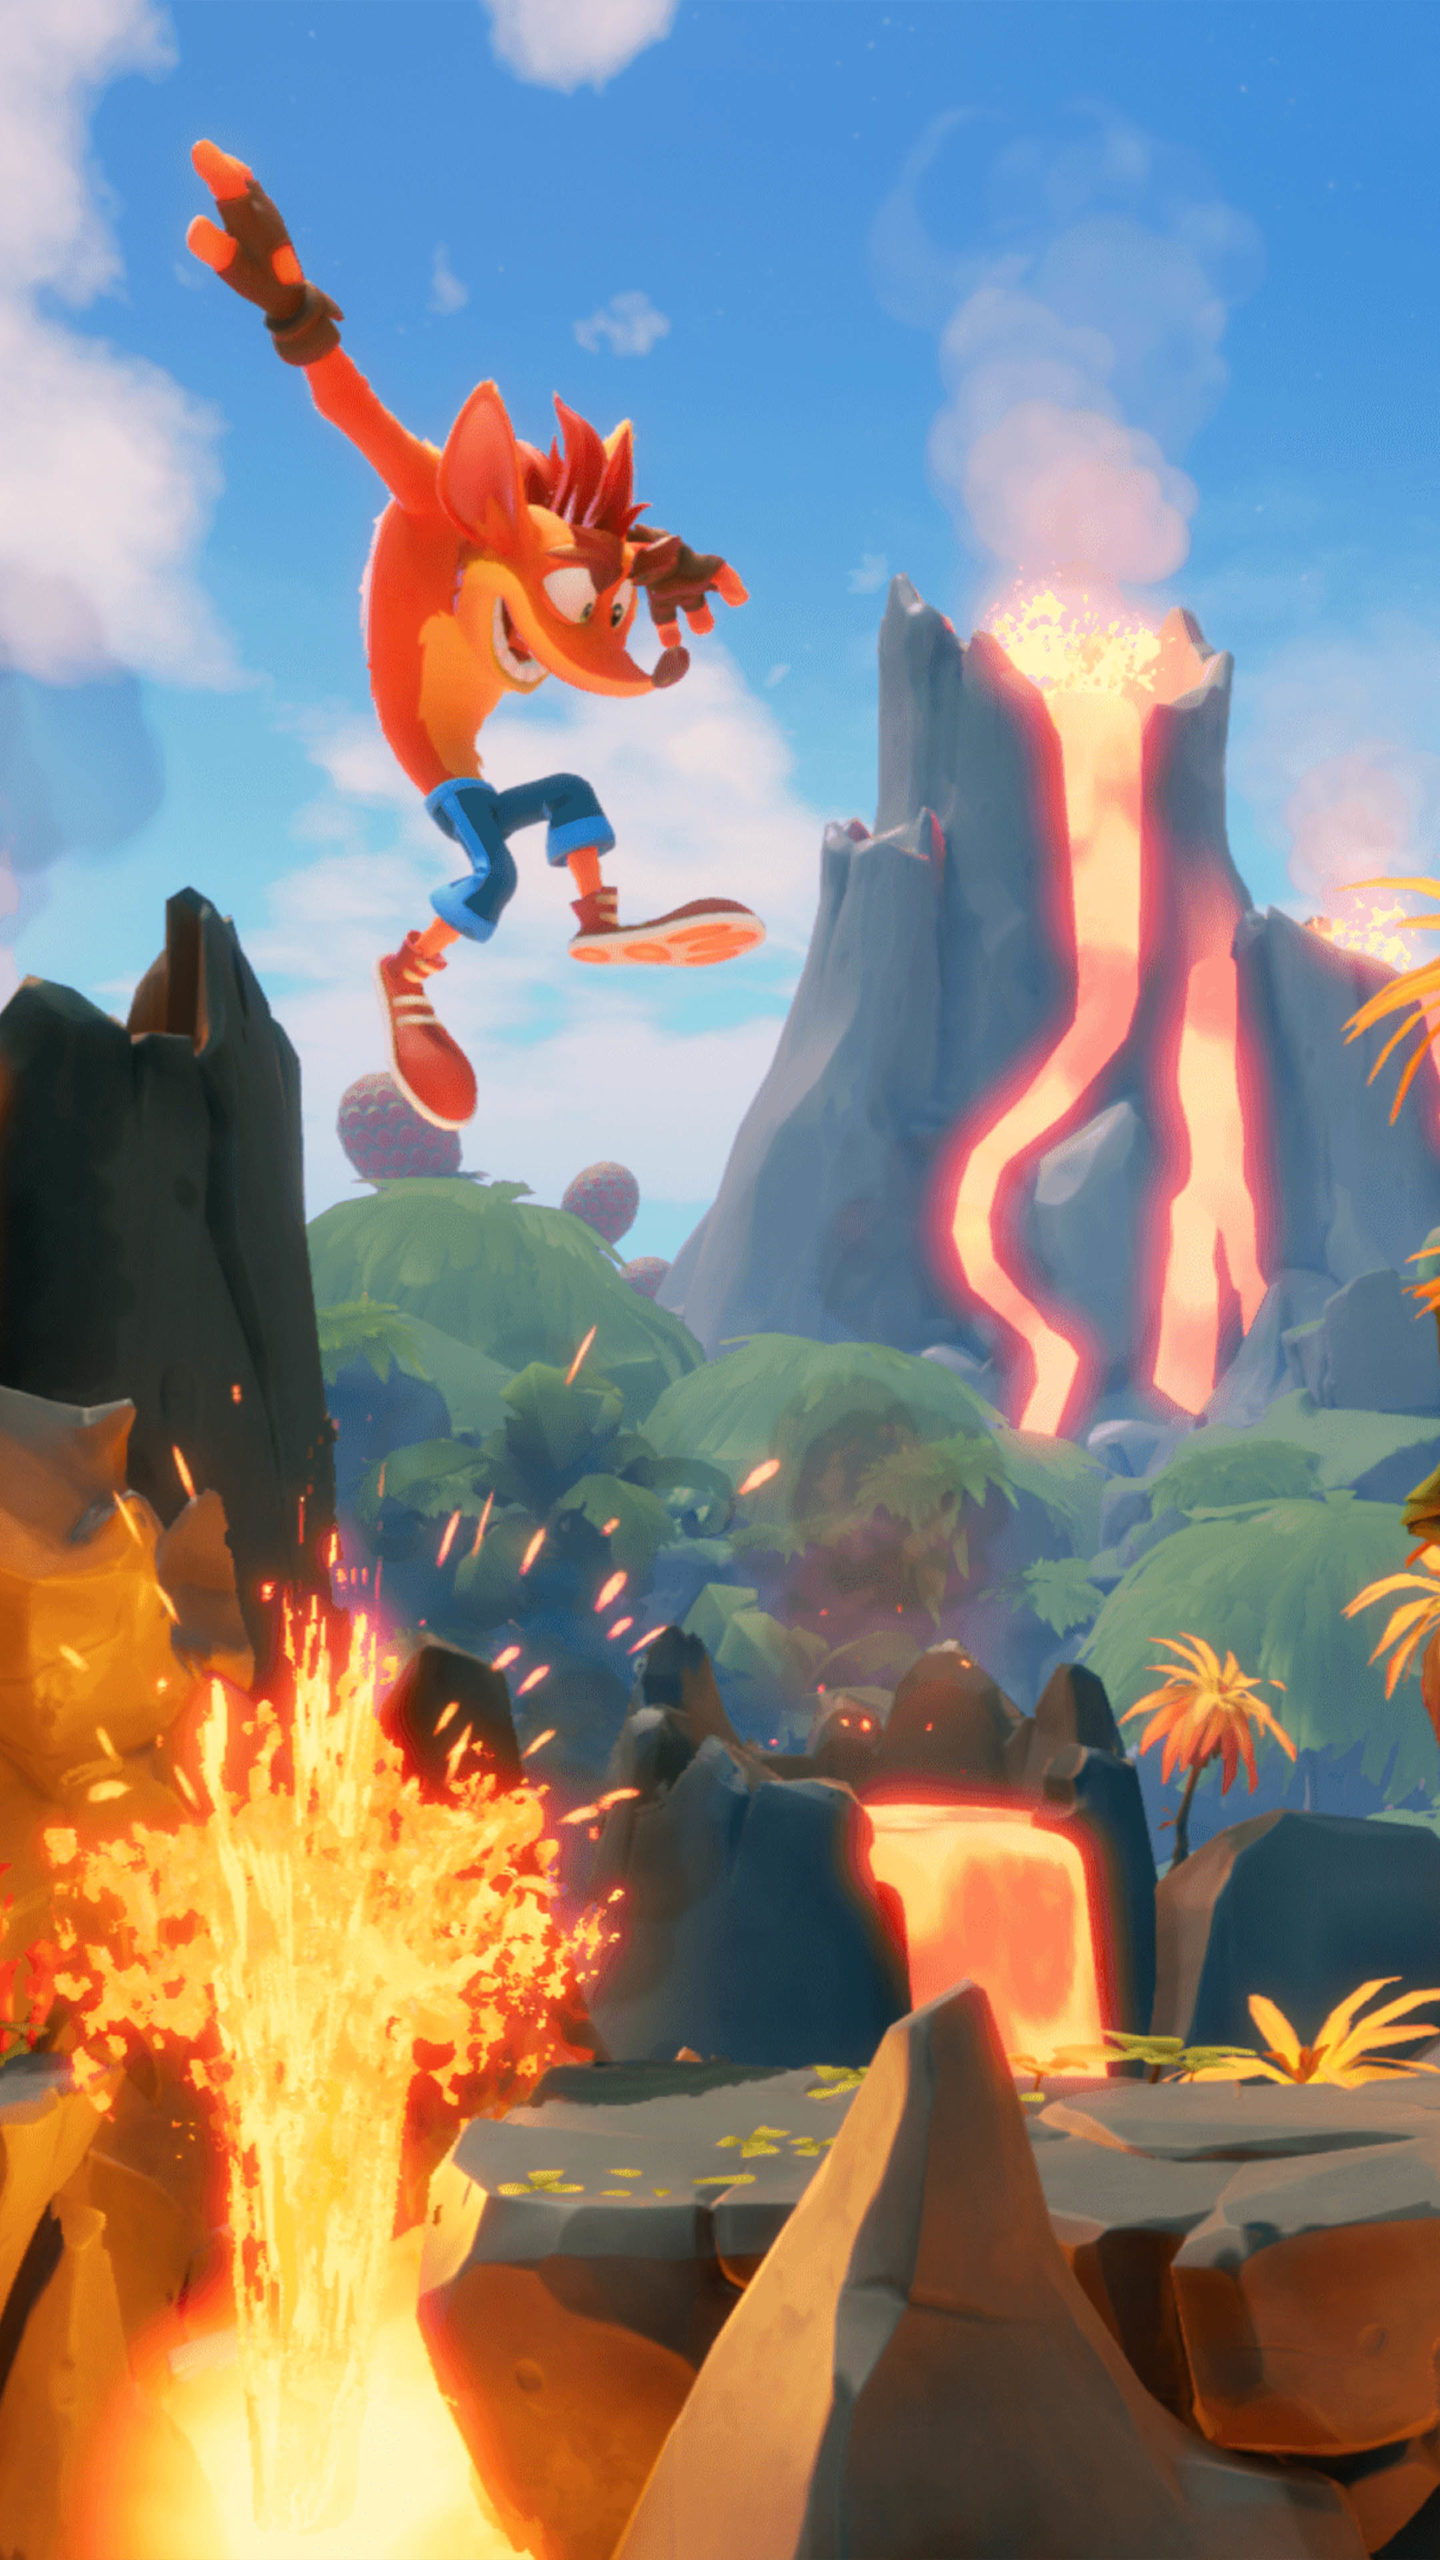 Best Collection of Crash Bandicoot 4K Ultra HD Mobile Wallpapers